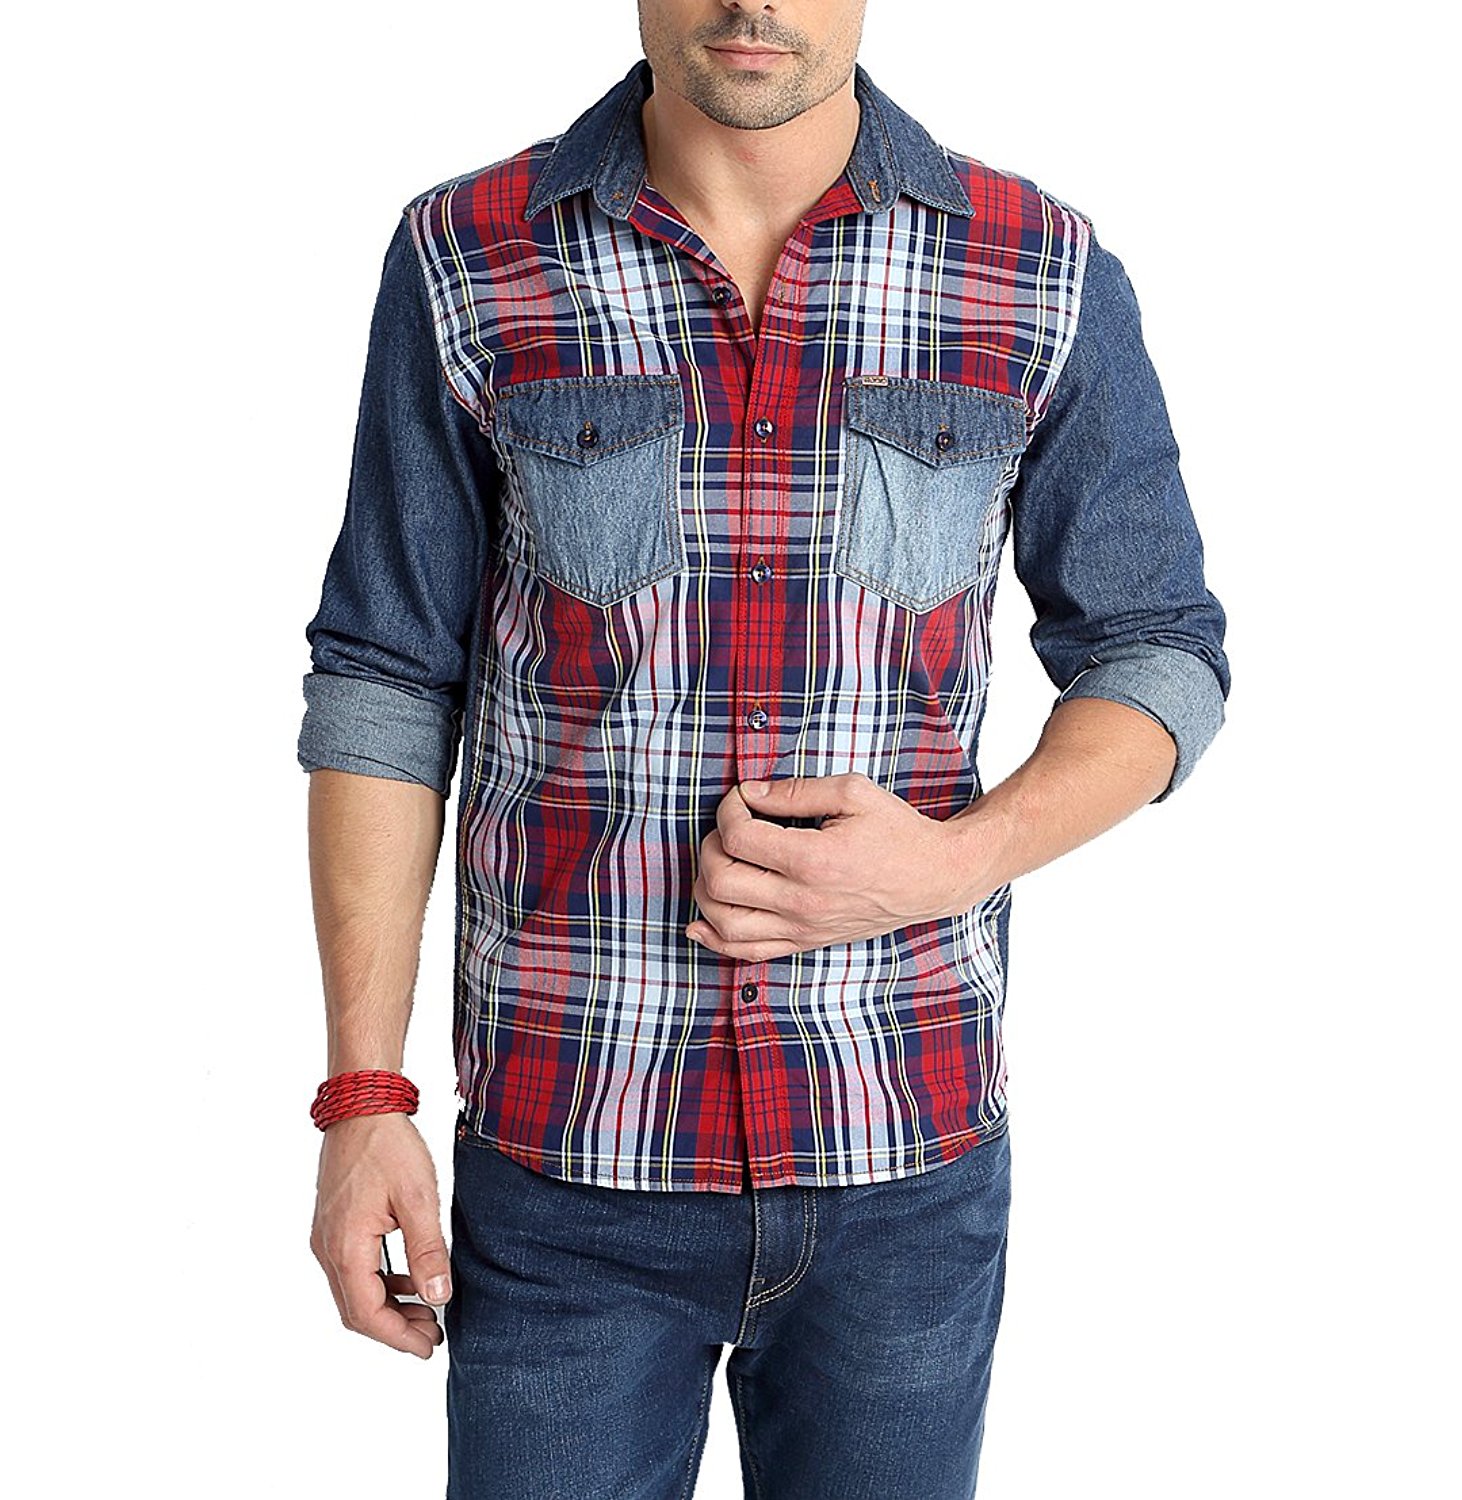 Buy a Stylish denim style multi-color shirt for 800 rupees